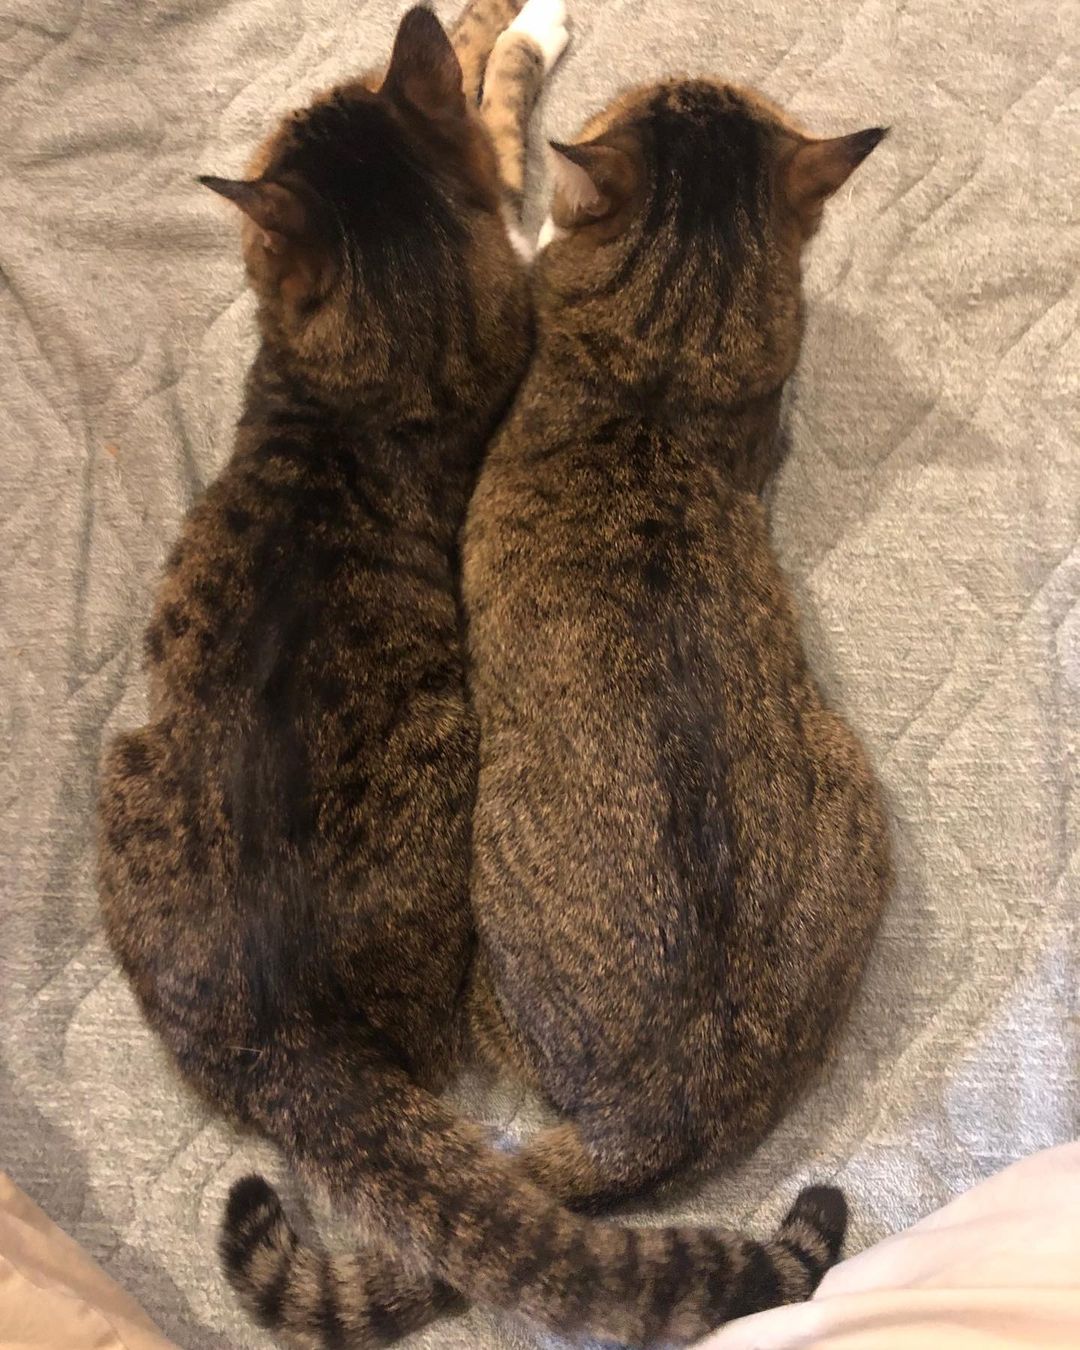 Twin cats